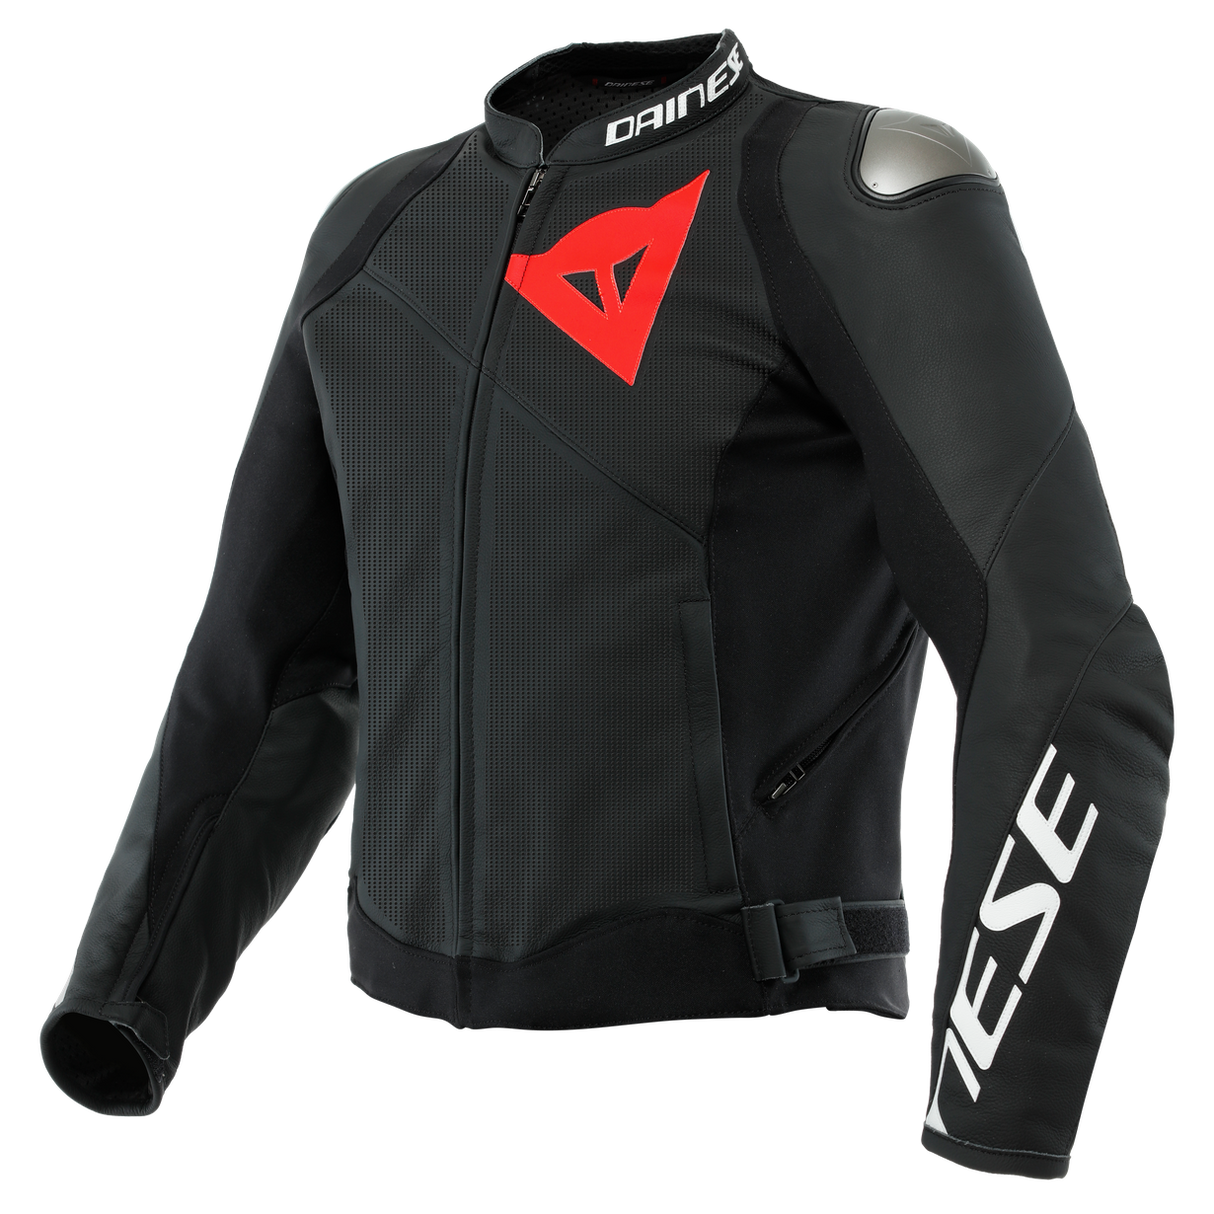 Dainese Sportiva Perforated Leather Jacket - Black-Matt/Black-Matt/Black-Matt